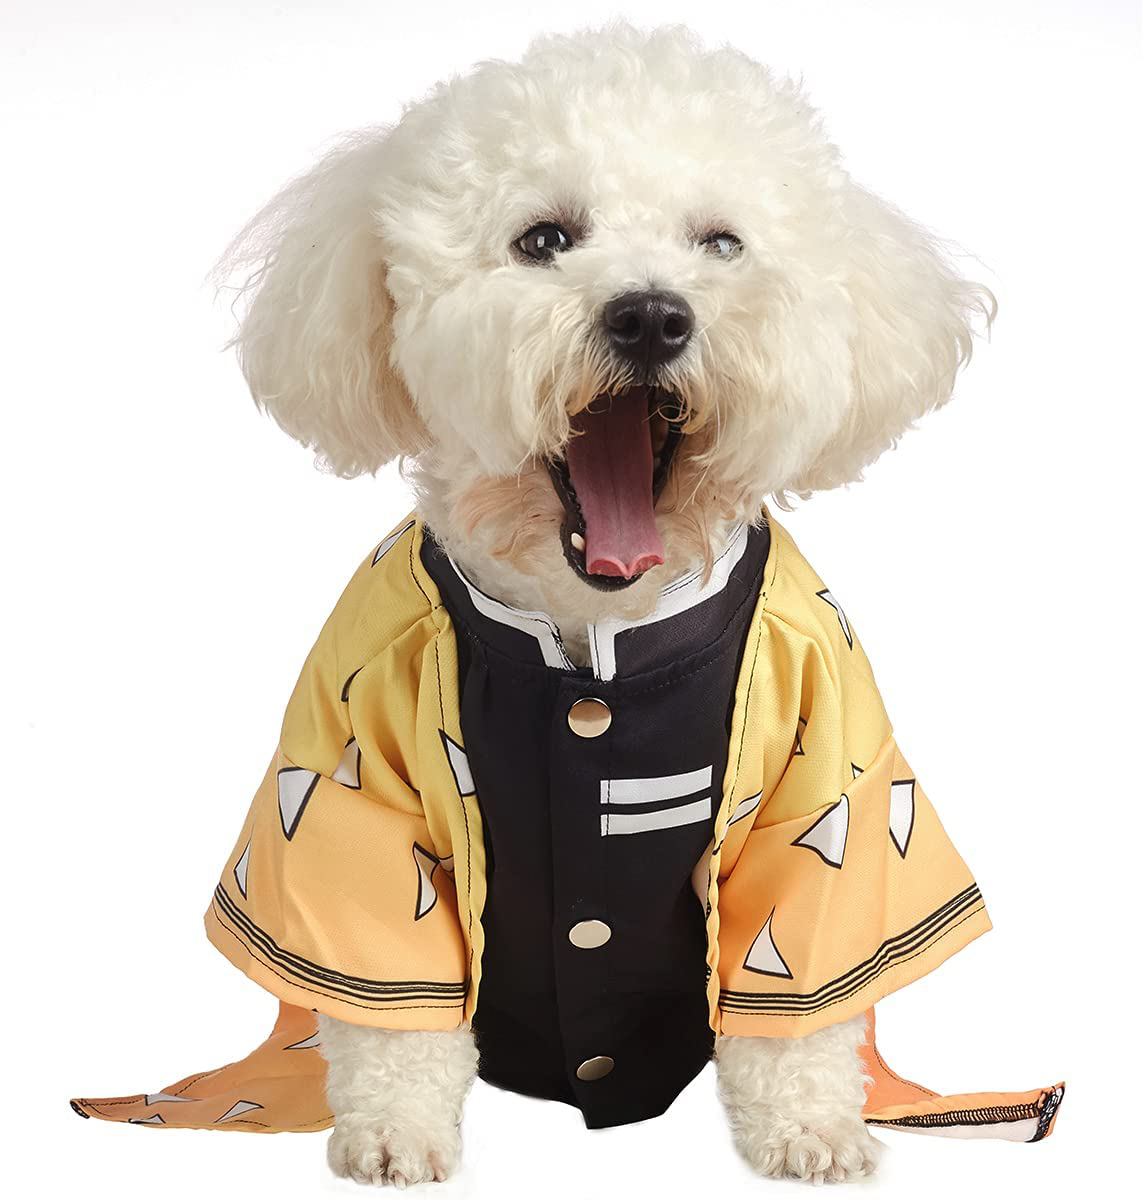 Coomour Dog Costume Pet Clothes Cat Cosplay Outfits Funny Small Dog Costumes